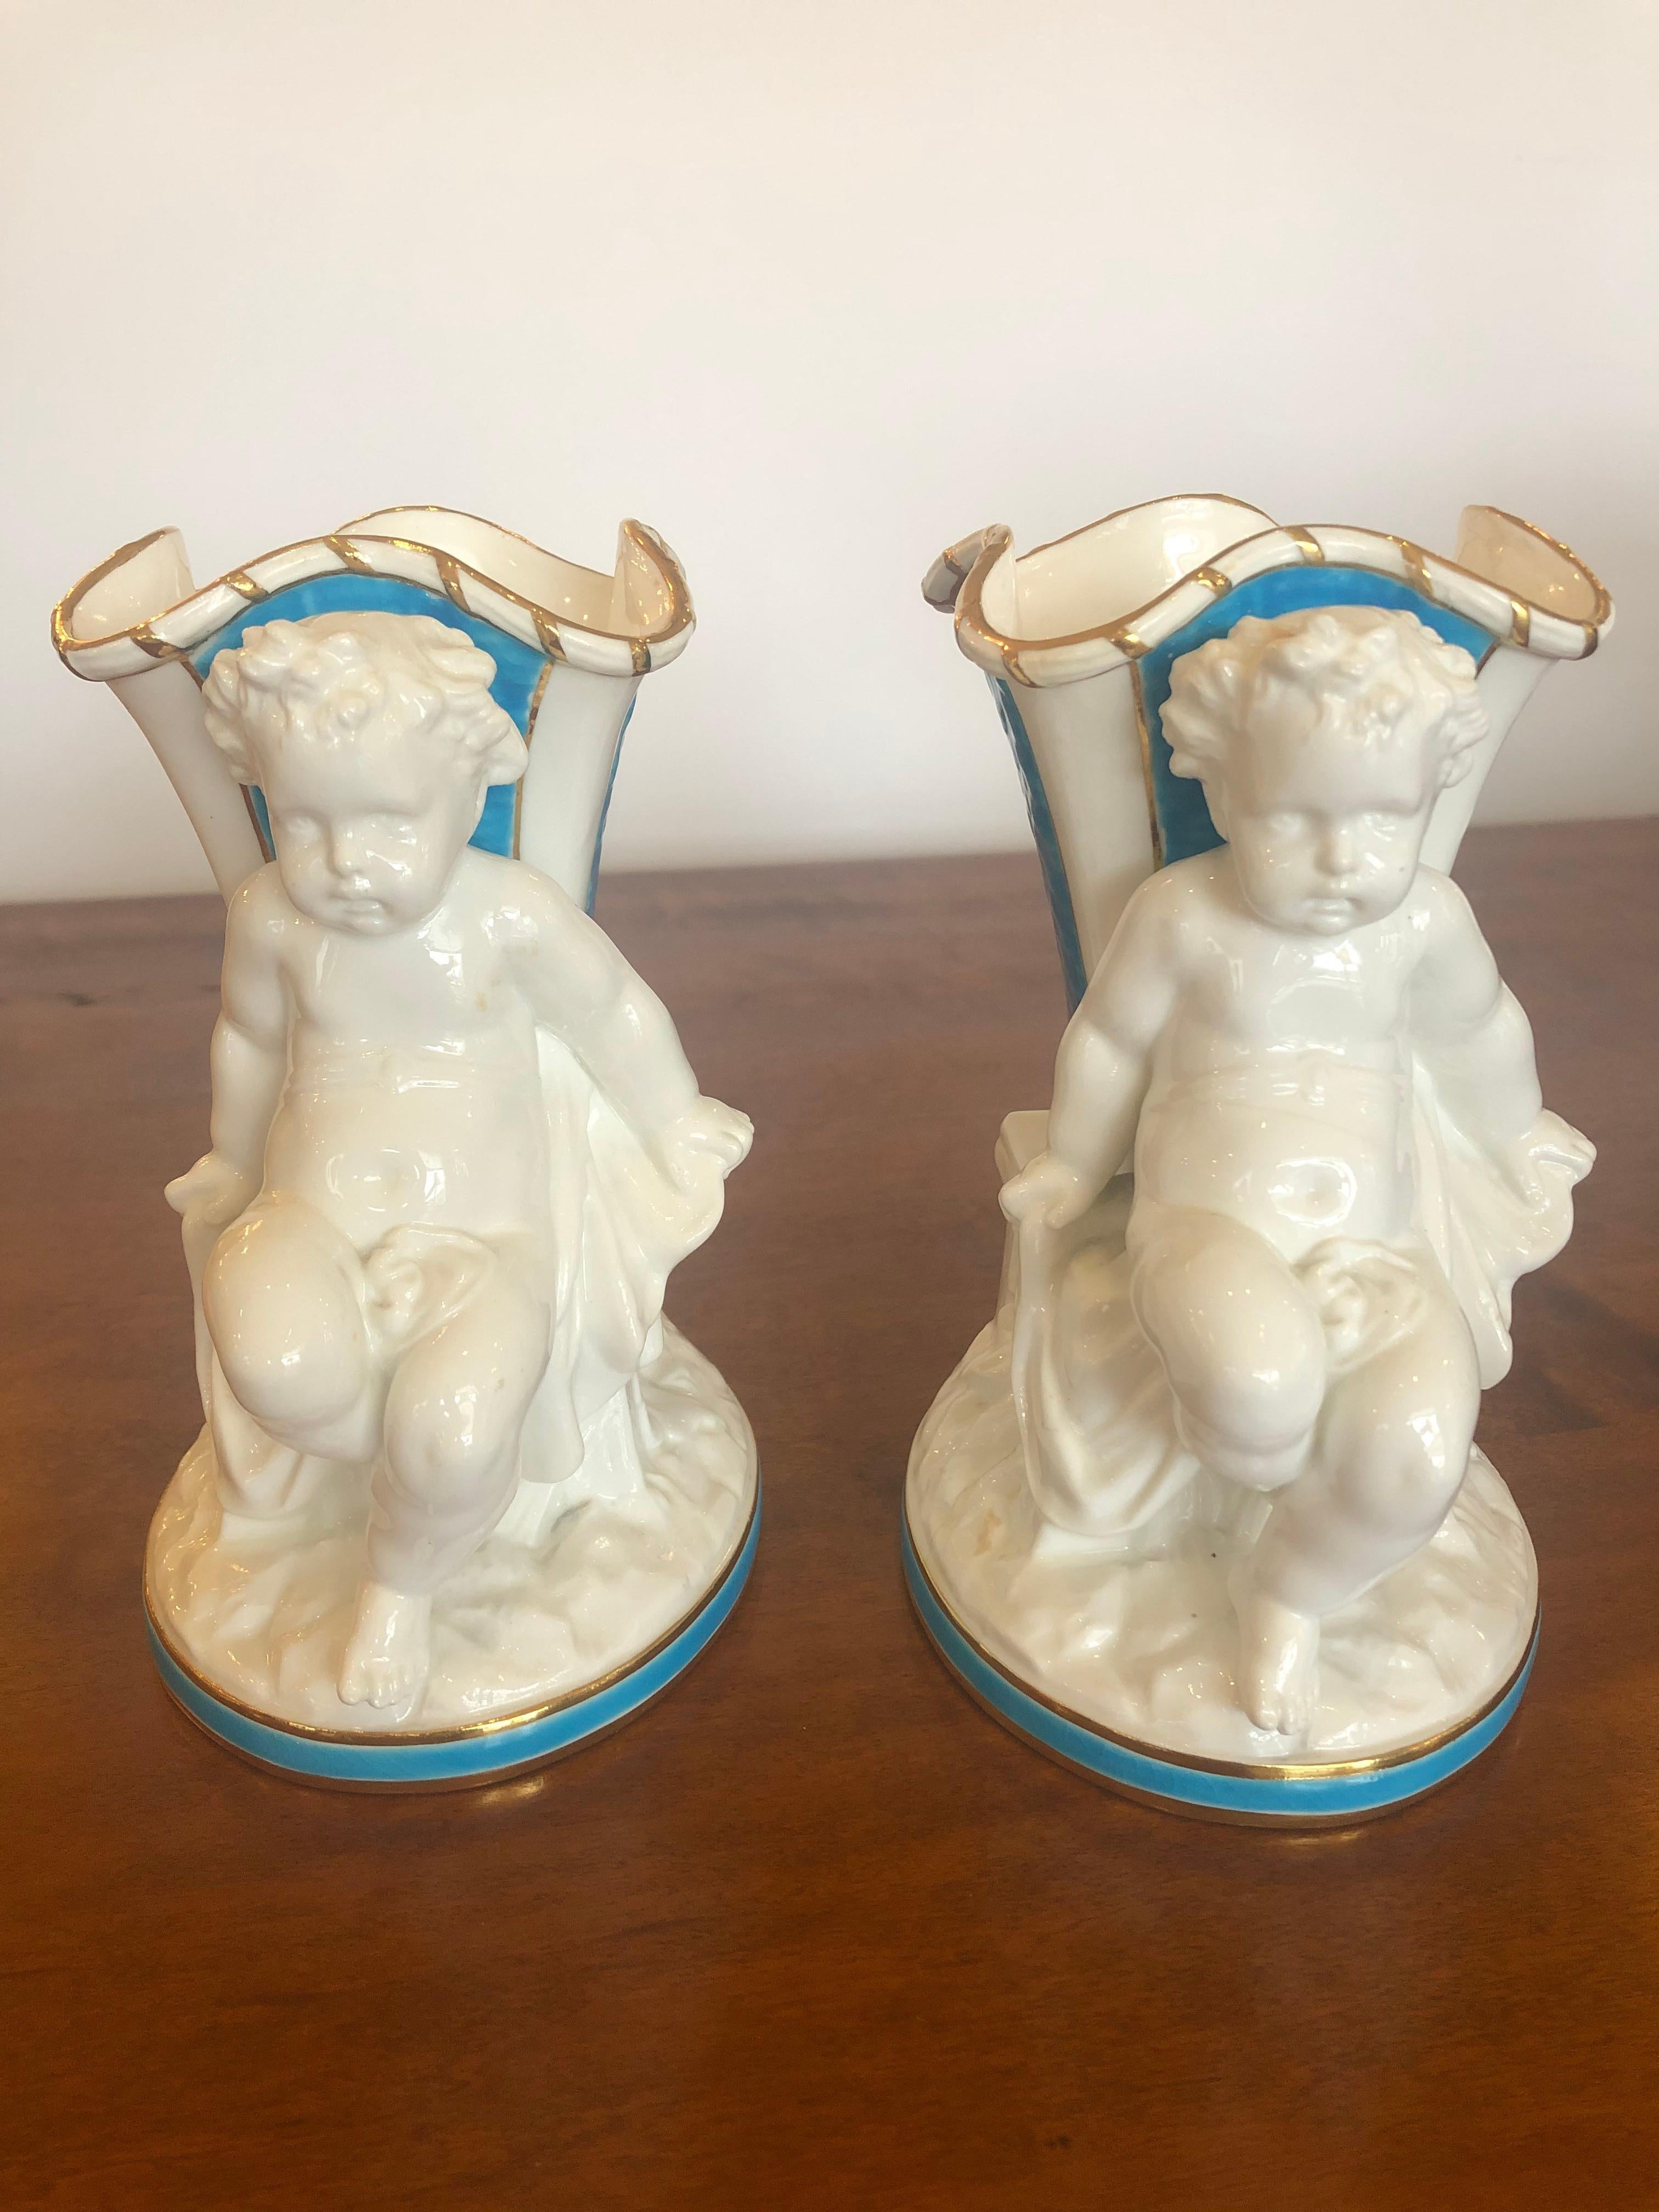 Superb Rare Pair of Cherub Minton Caldwell Tiffany Blue and White Spill Vases For Sale 6